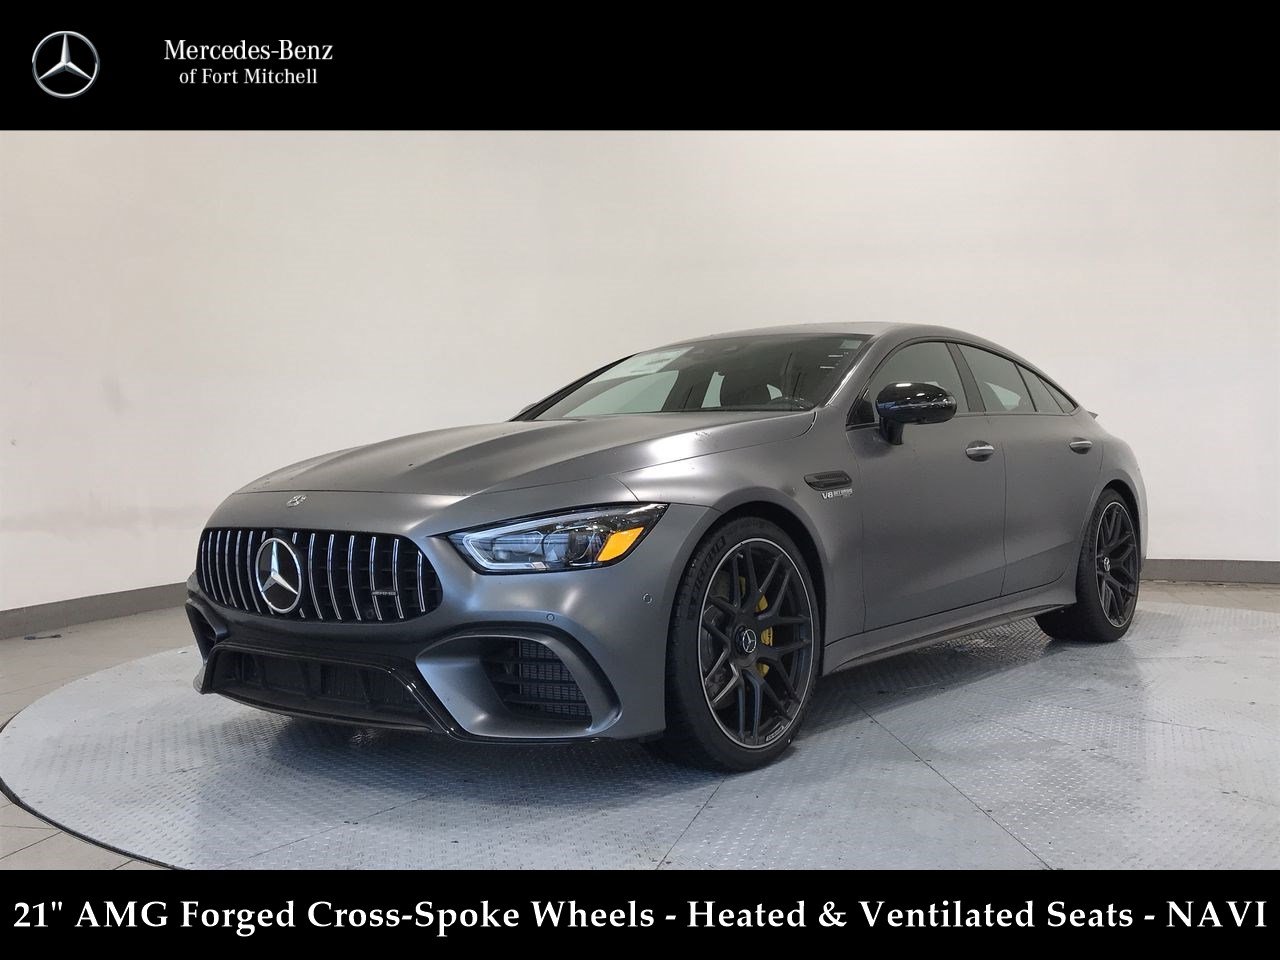 New 2019 Mercedes Benz Amg Gt 63 S Awd 4matic